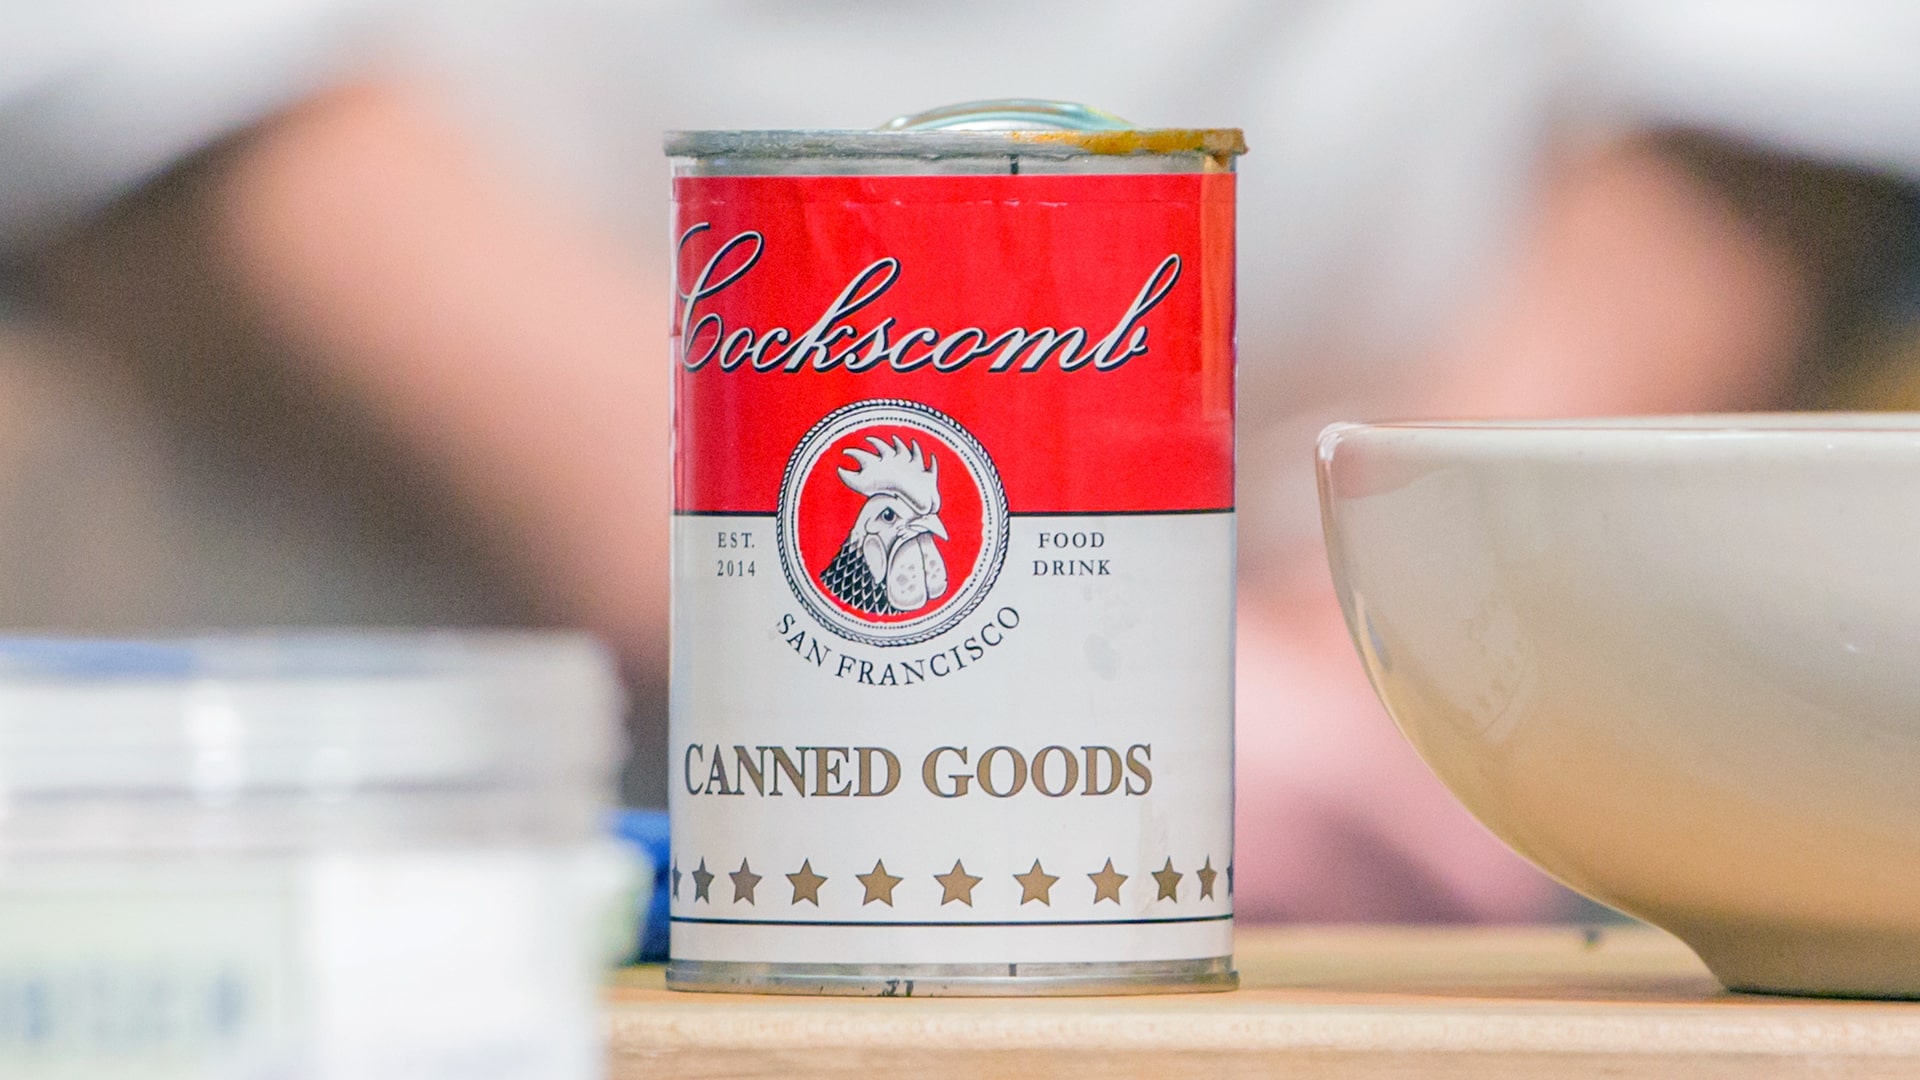 Photo of a can of "food drink" by Cockscomb